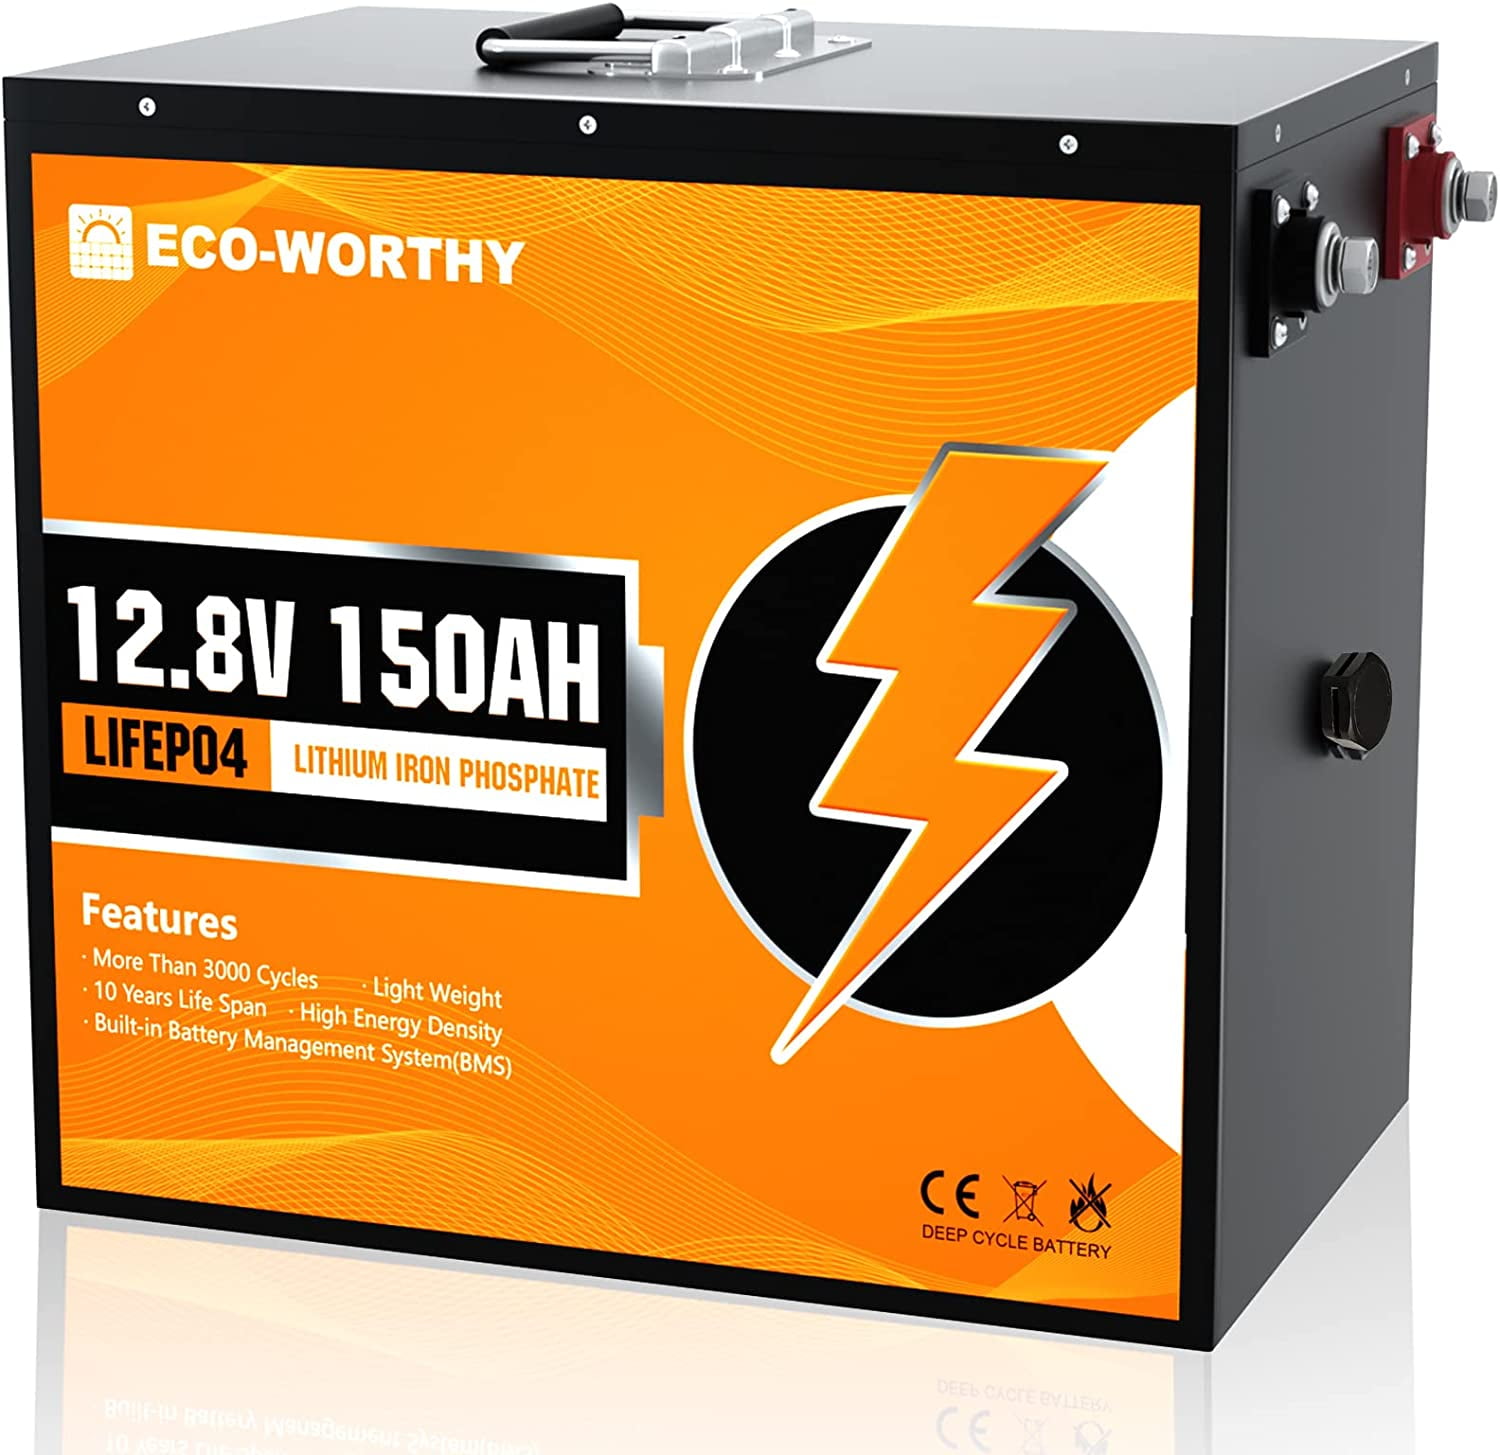 12V 150Ah LiFePO4 Deep Cycle Lithium Iron Phosphate Rechargeable Battery  Pack Built-in 100A Balance BMS, 4000 Life Cycles & 10-Year Lifetime,  Perfect